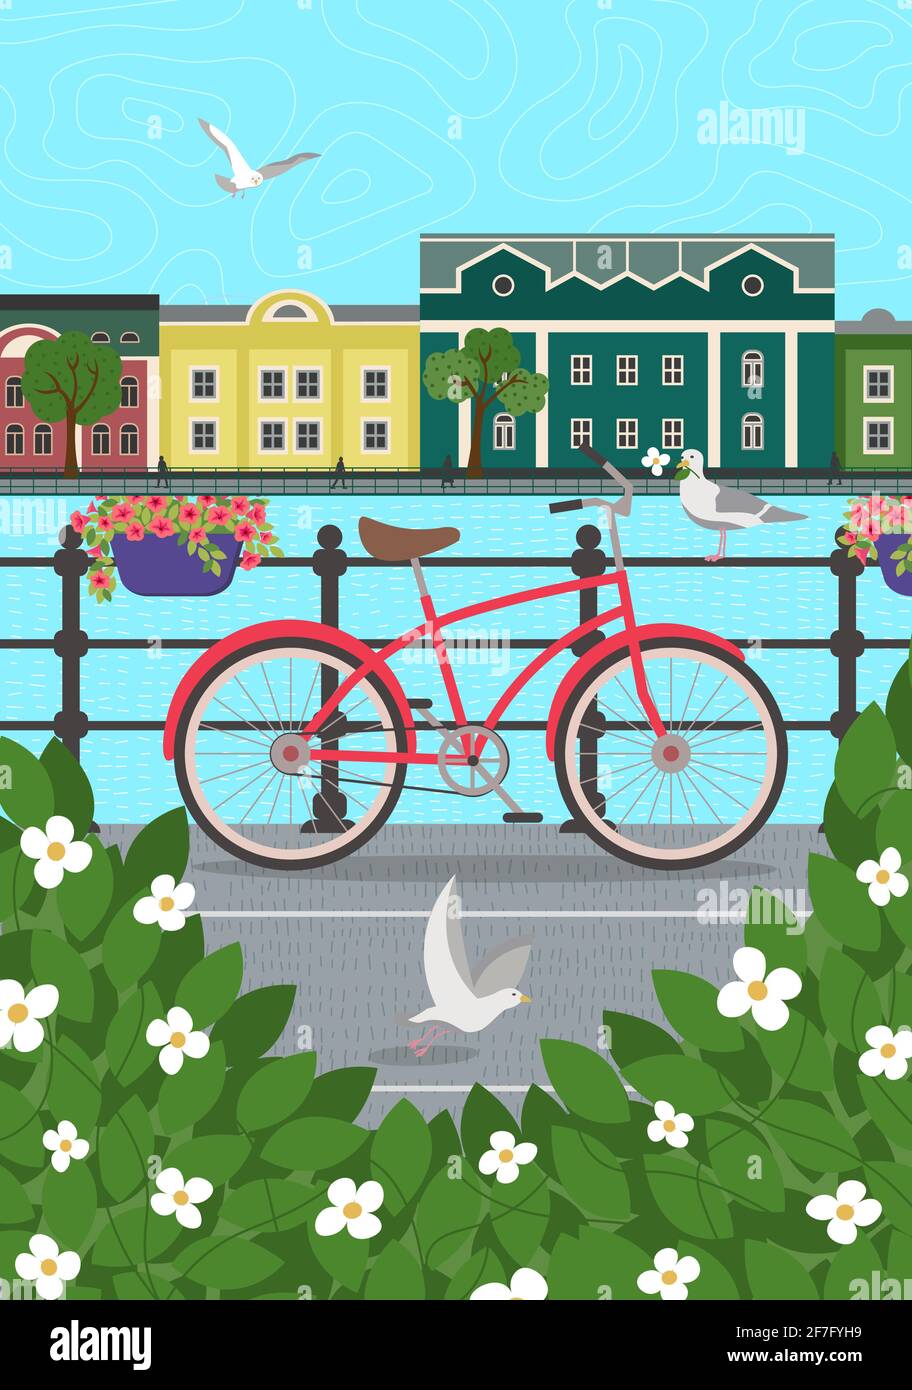 Old town embankment on water poster. Green bush thickets, bicycle by fence and flying seagulls over river. European city architecture and street background. Vector colorful card or banner illustration Stock Vector